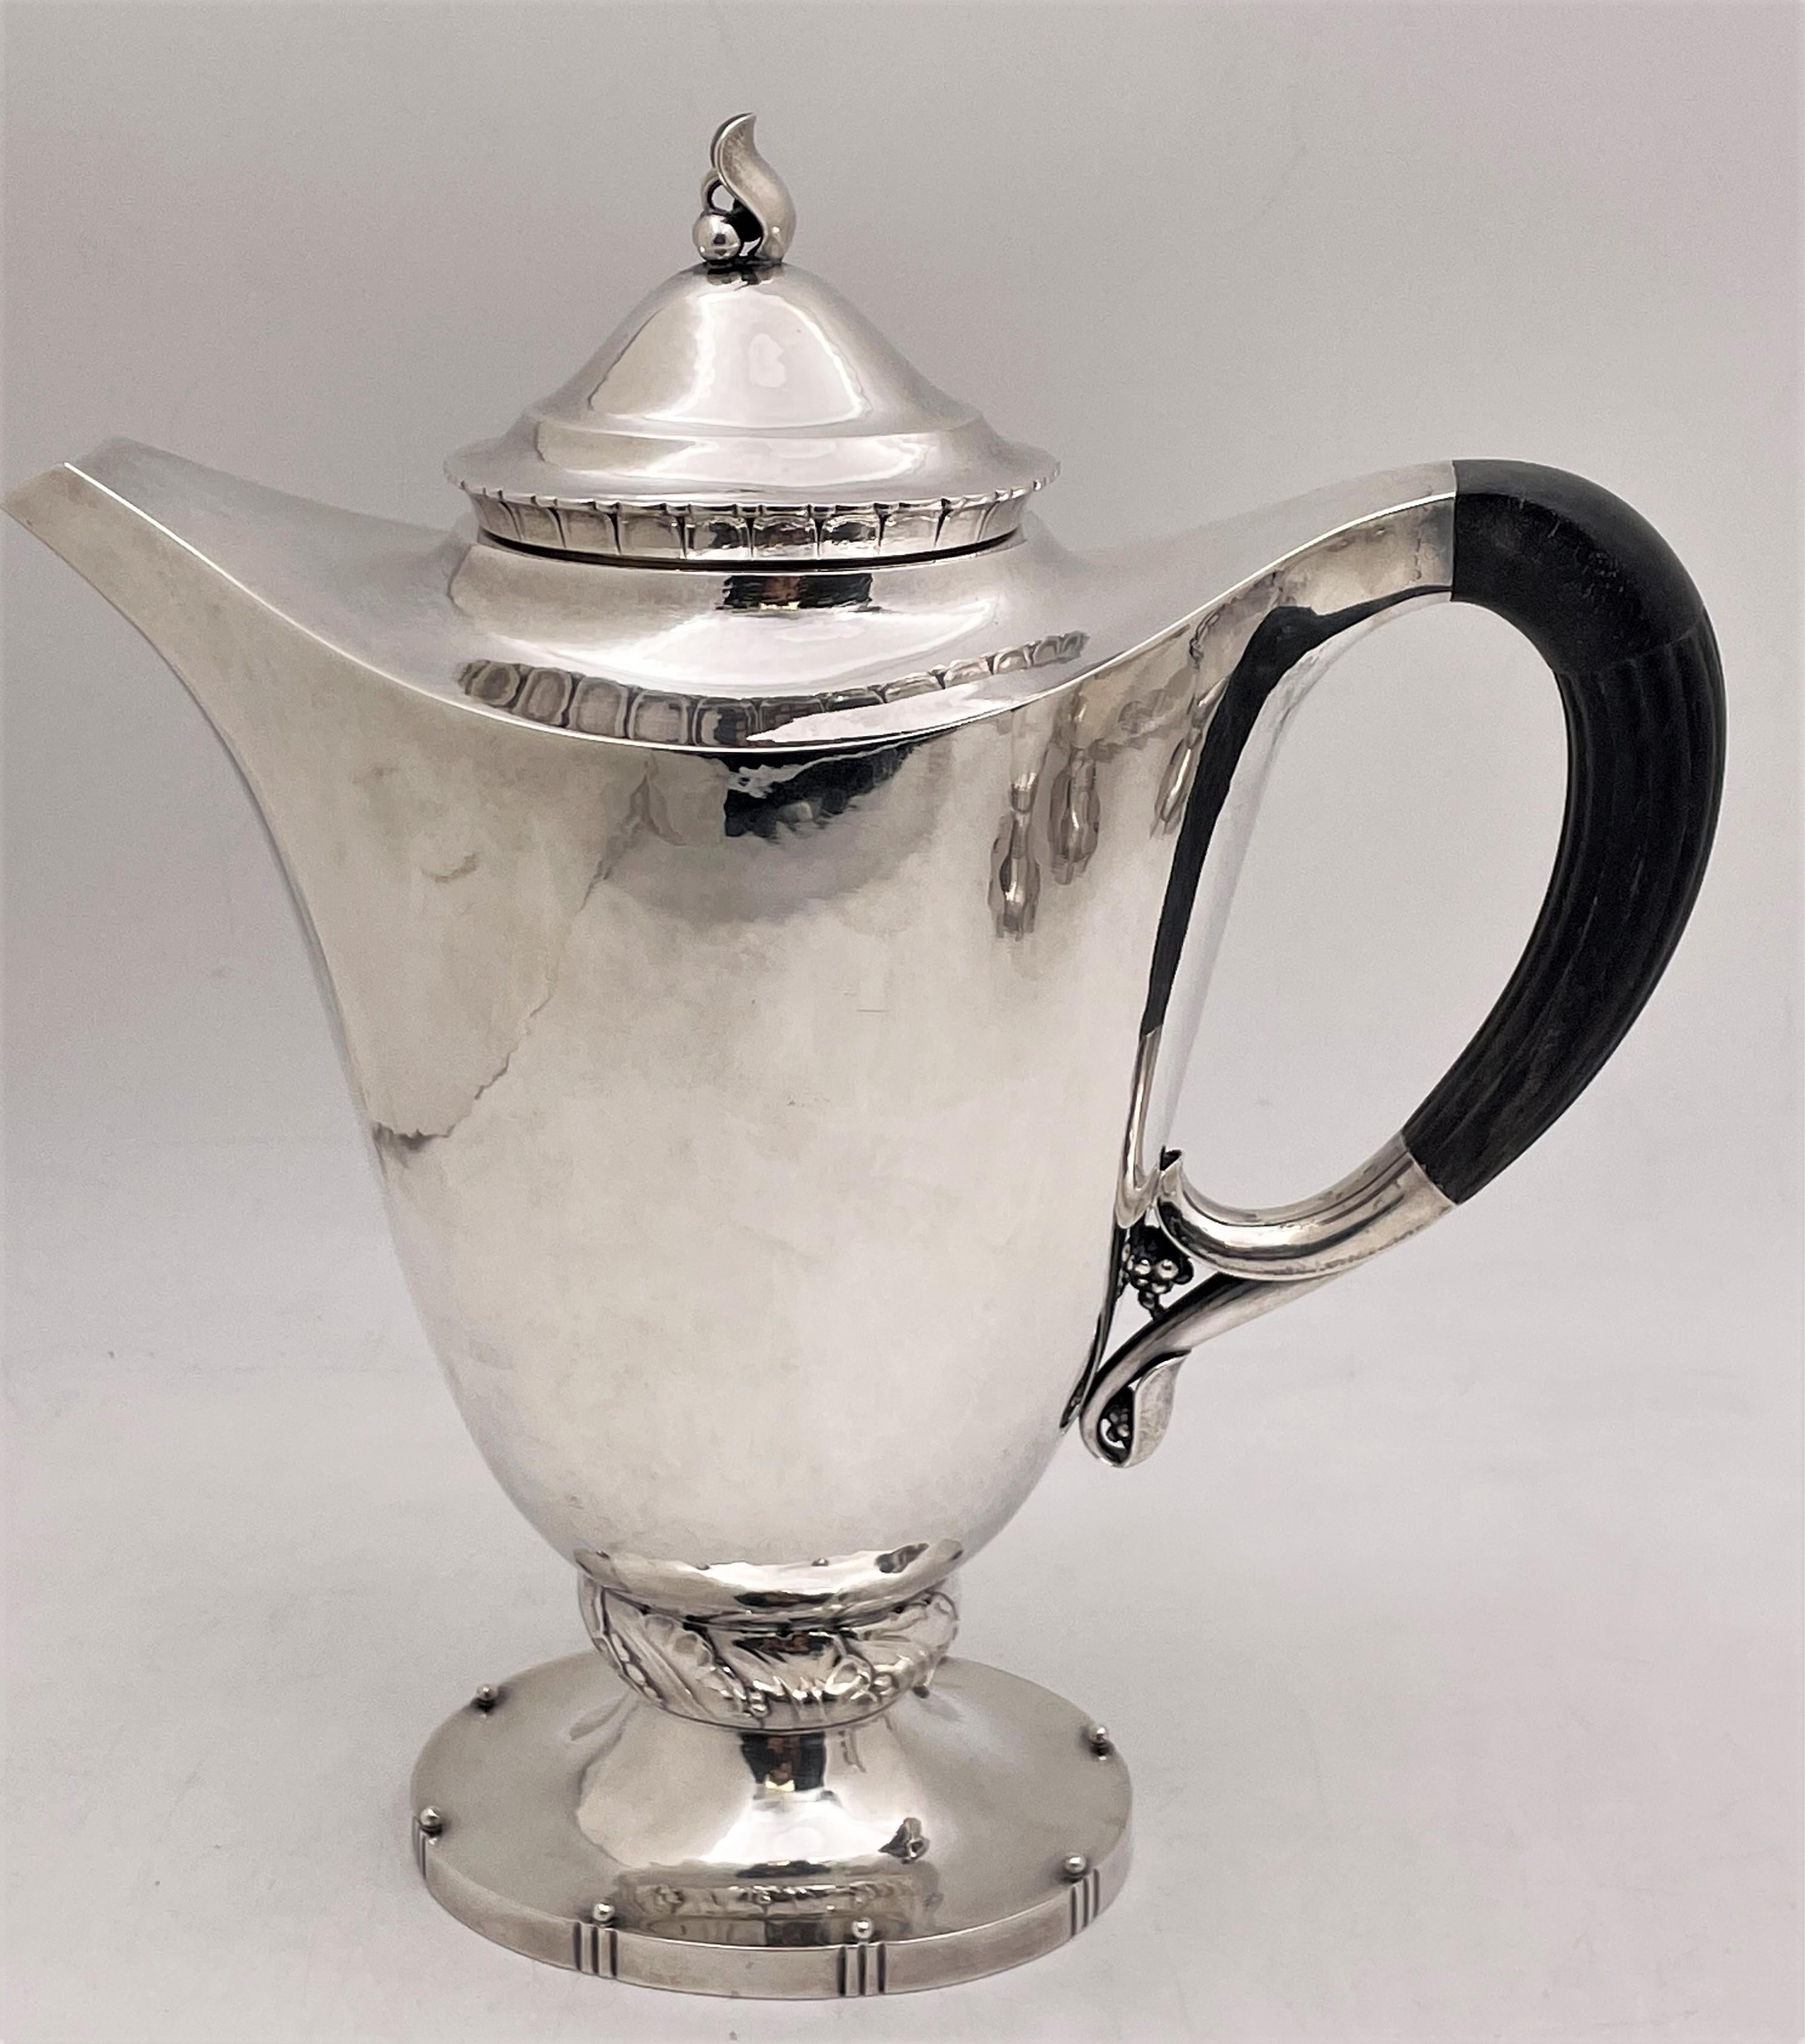 Rare Georg Jensen, sterling silver 4-piece tea and coffee set, all beautifully hand hammered, with exquisite natural motifs and elegant proportions, designed by Georg Jensen circa 1910/1920, consisting of:

- a coffee pot, measuring 10 3/4'' in